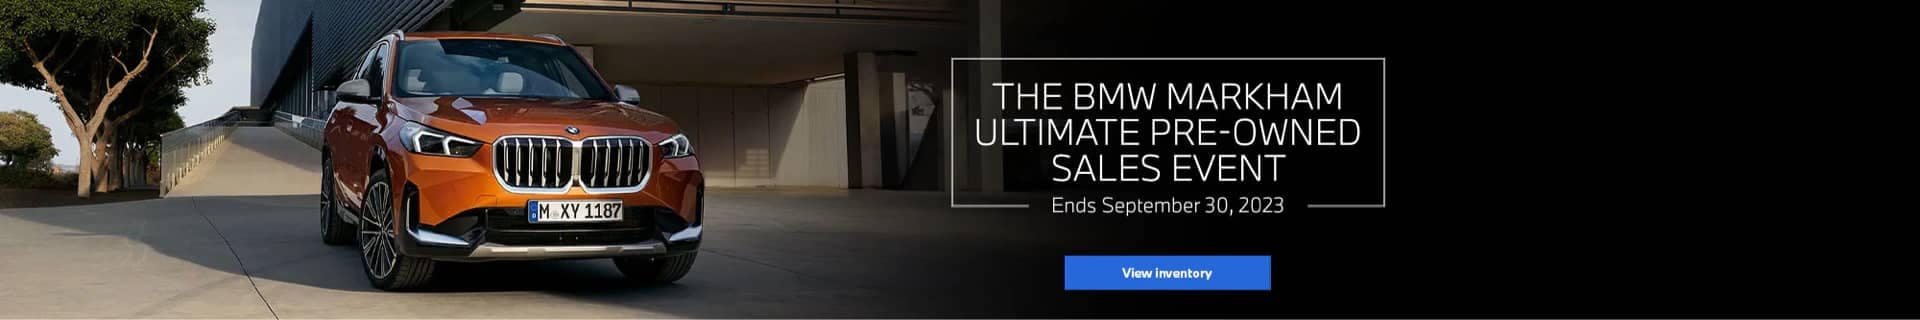 Ultimate Pre-Owned Sales Event Inventory Slide